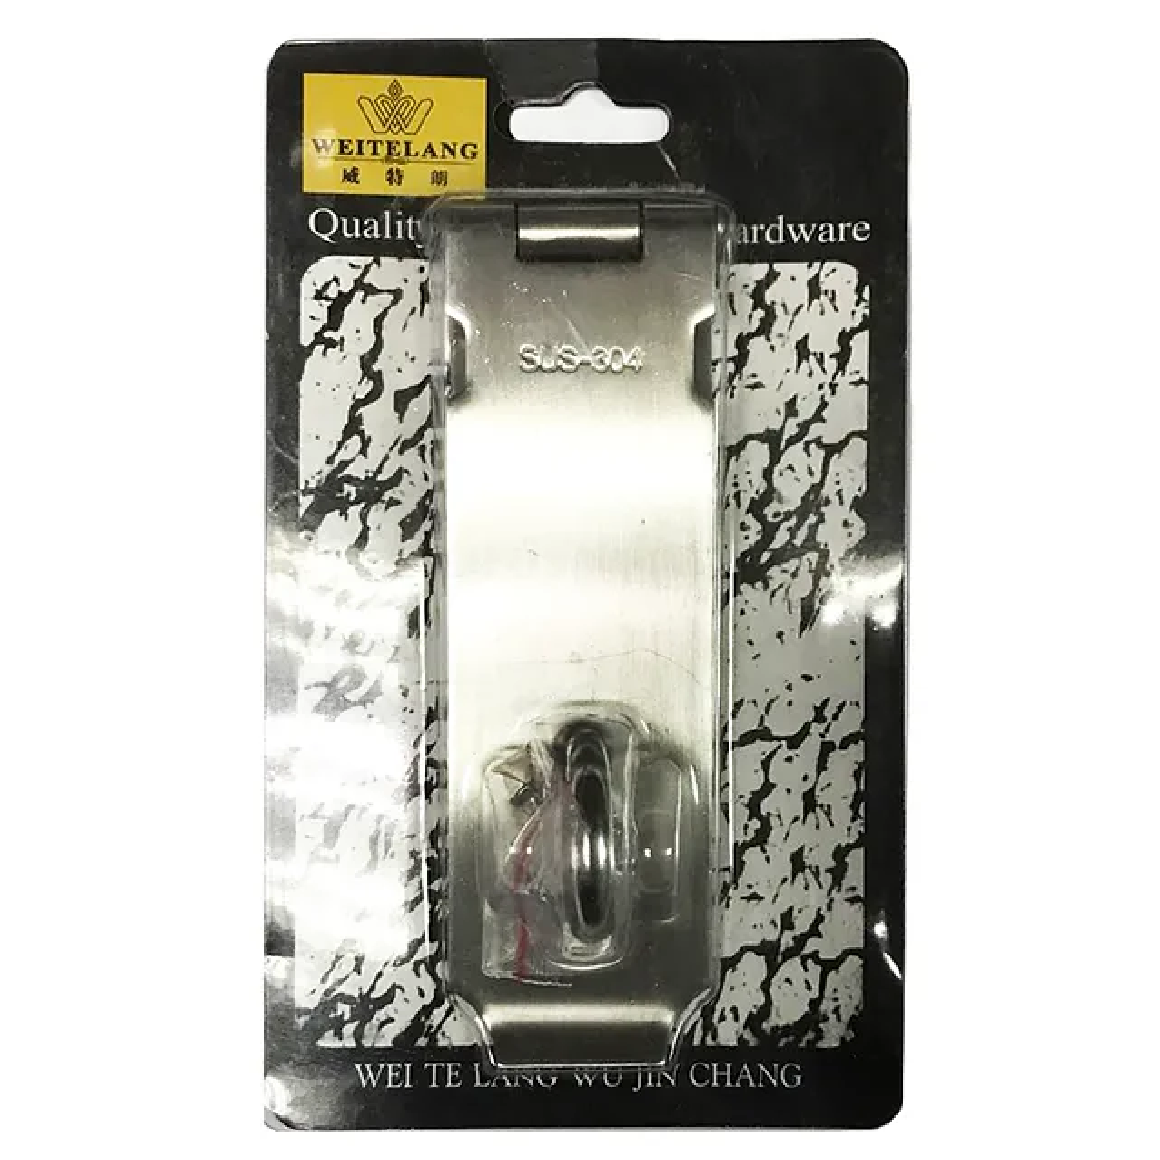 SUS-304 Stainless Steel HASP & STAPLE 5"/125MM